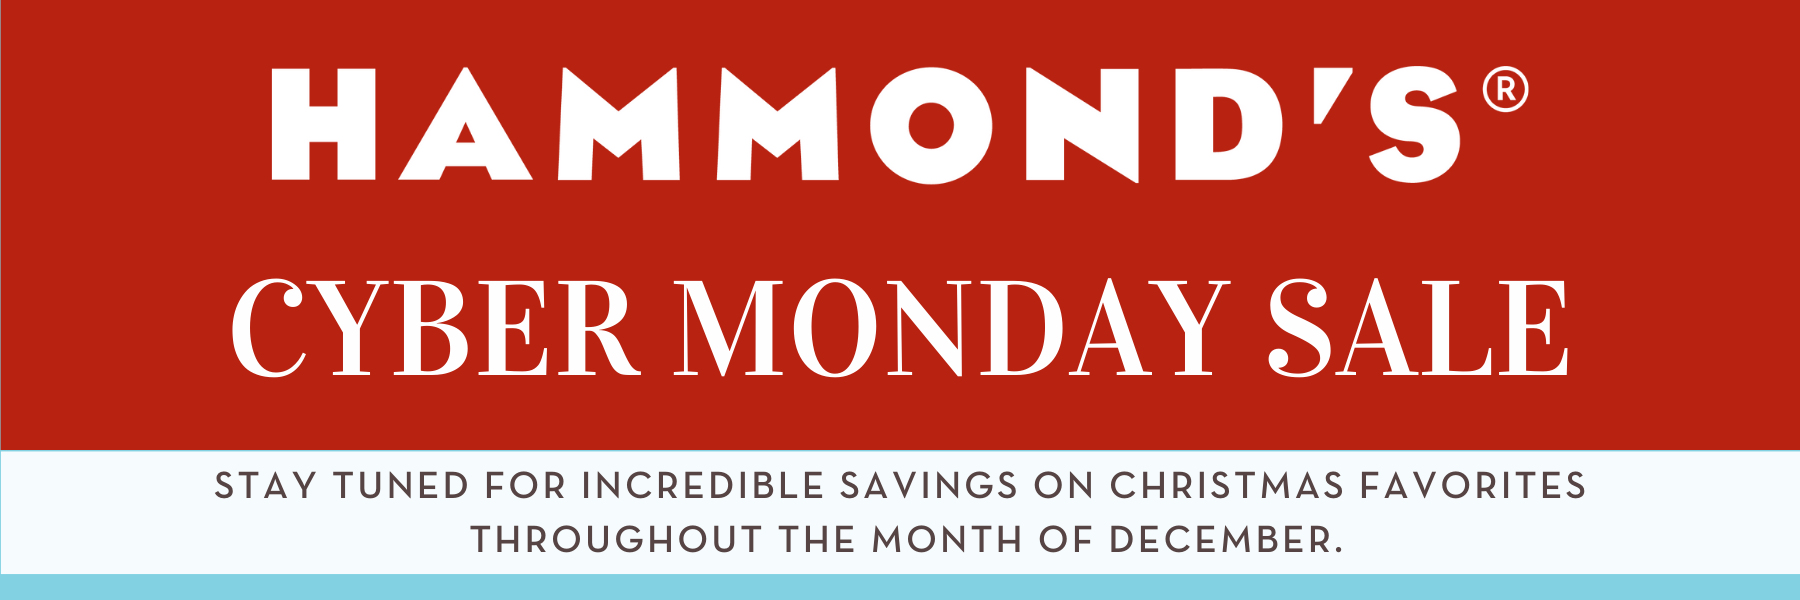 Cyber Monday Sale!  Stay tuned throughout December for Incredible savings on Christmas favorites